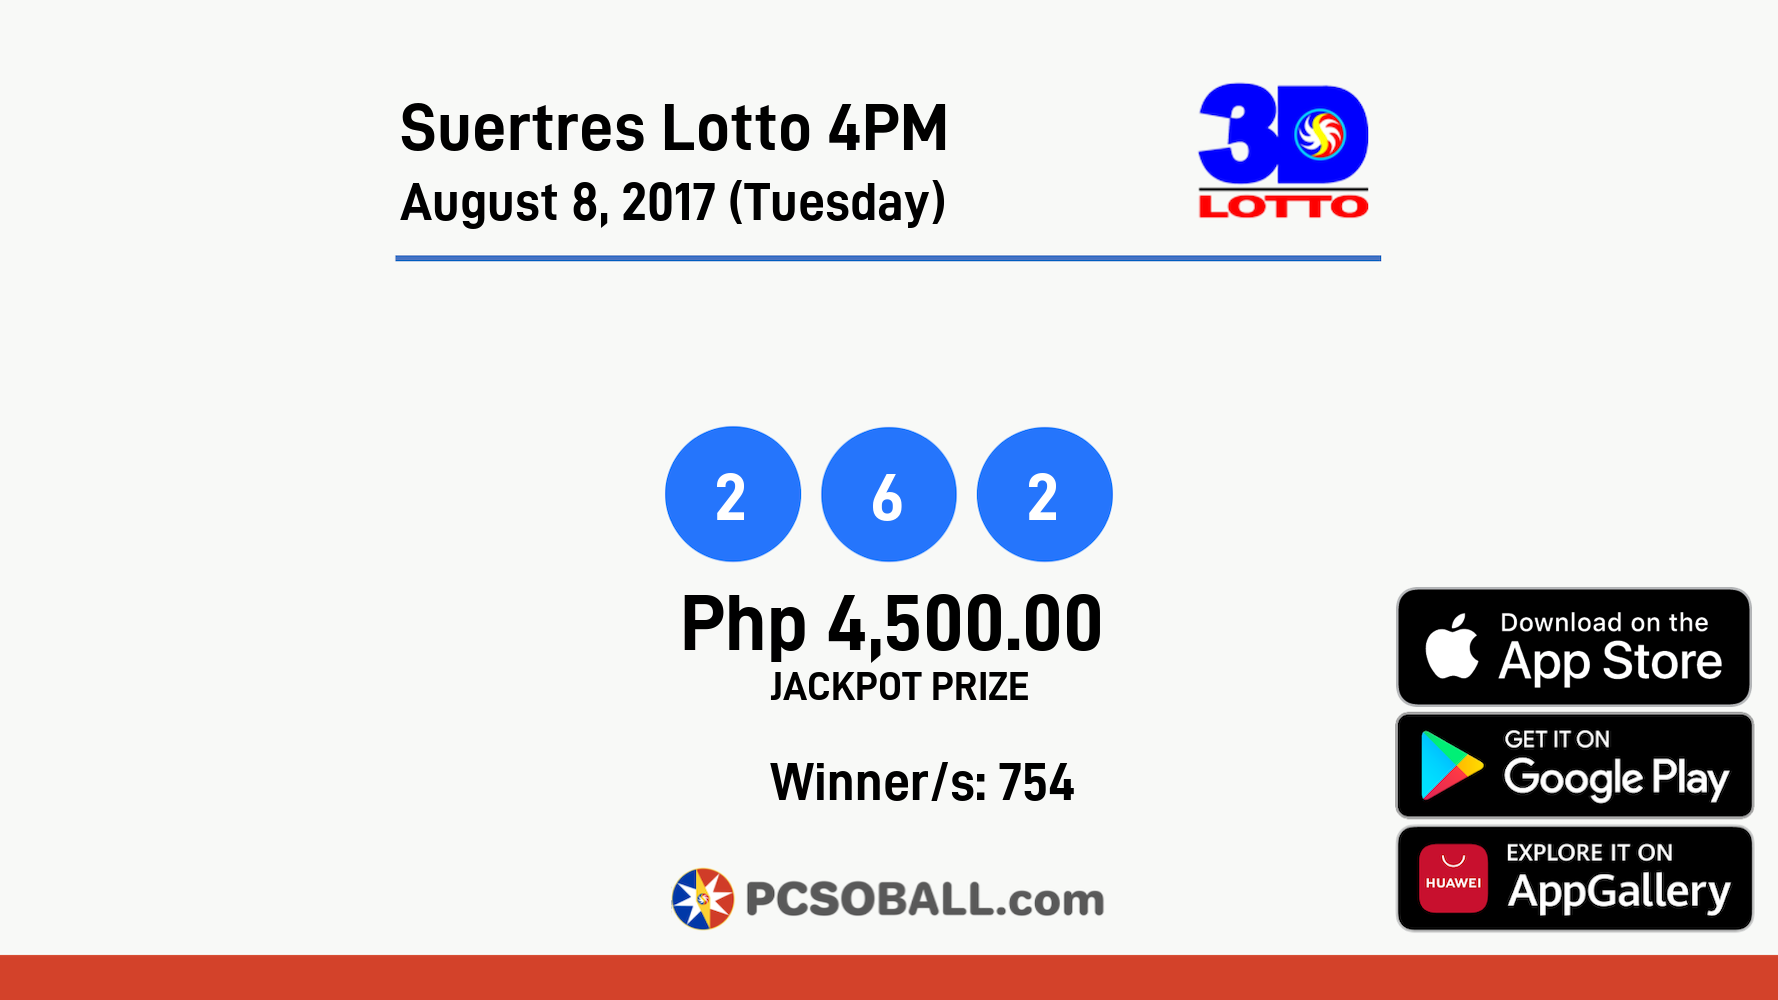 Suertres Lotto 4PM August 8, 2017 (Tuesday) Result